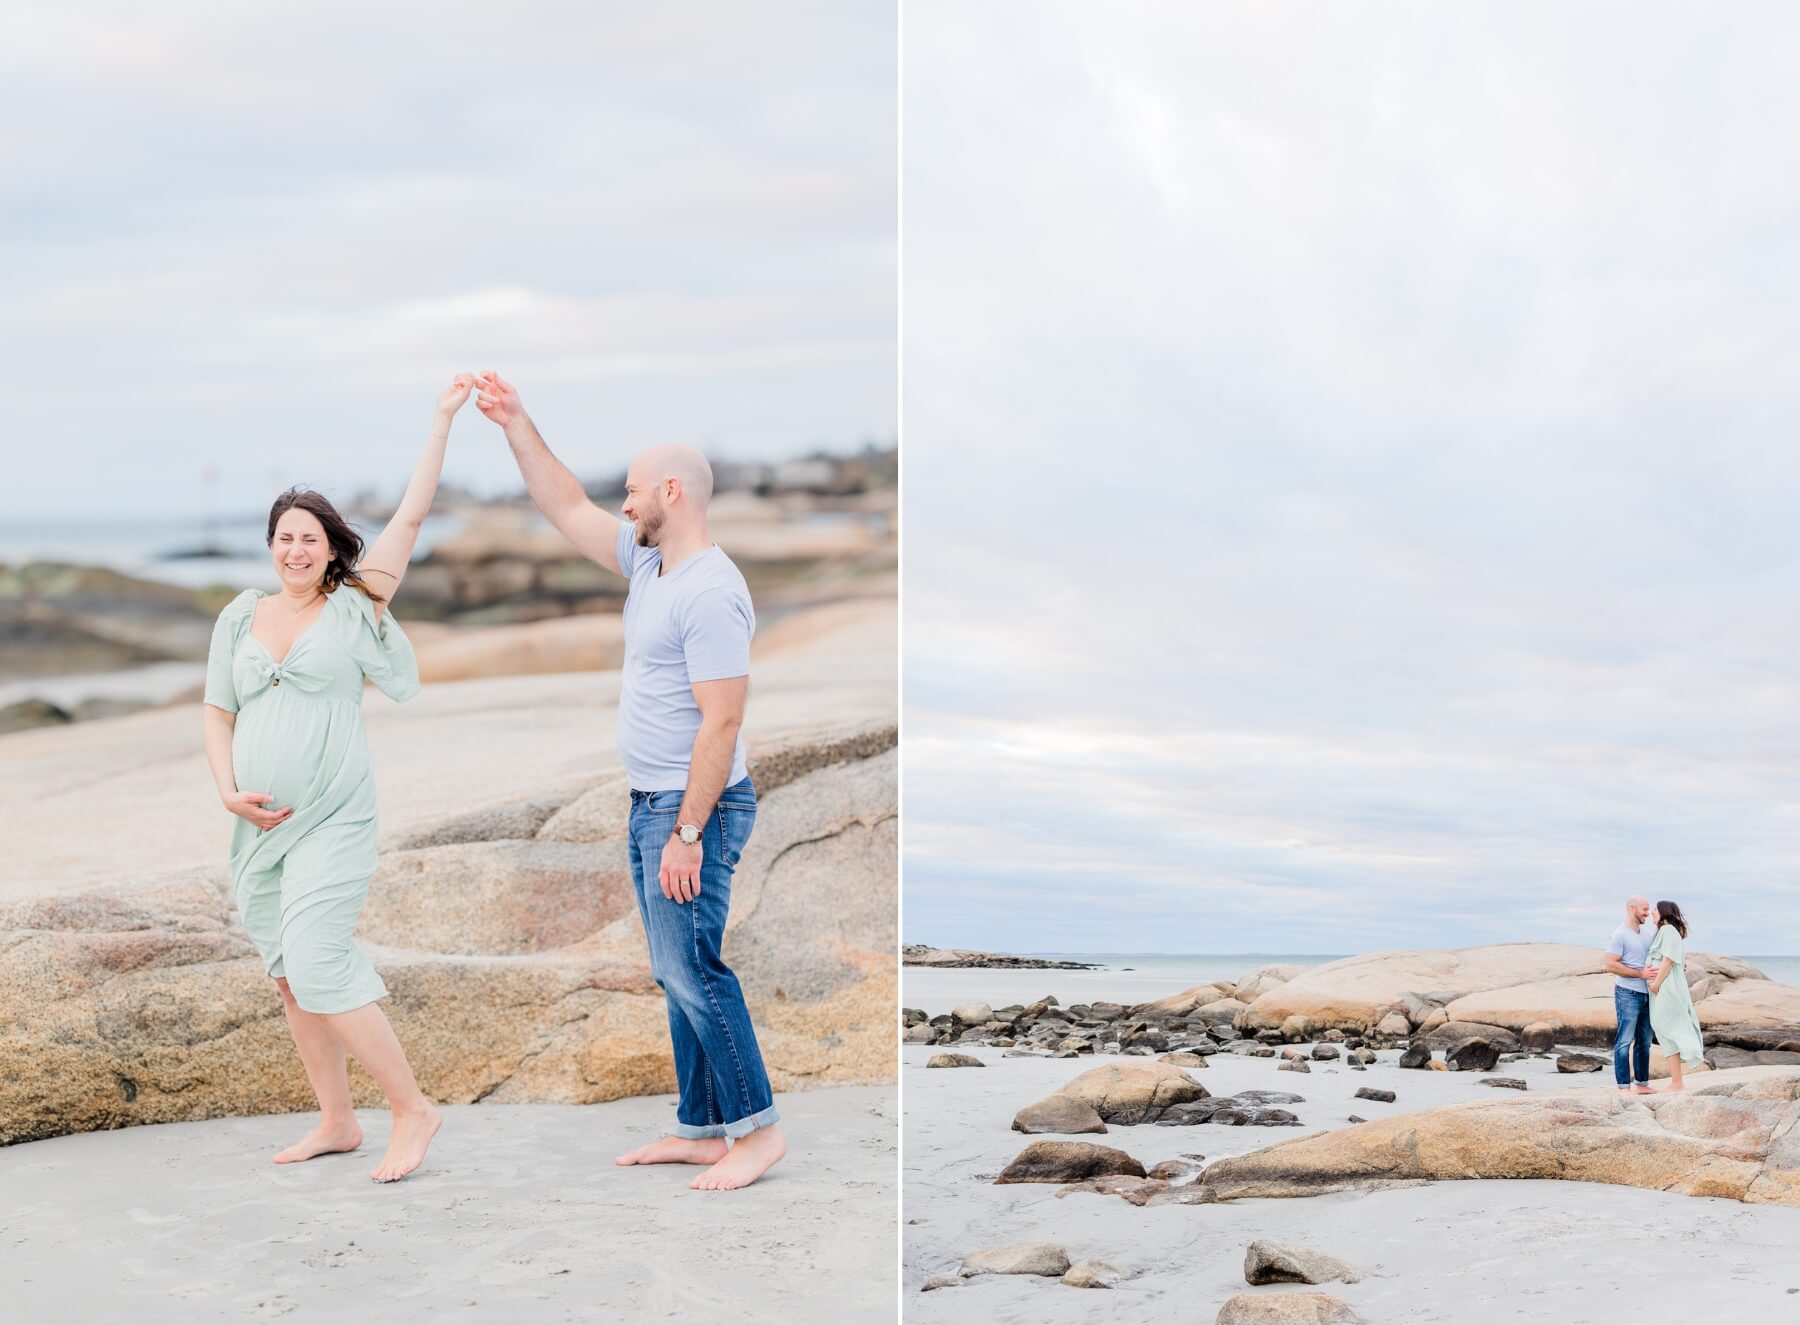 A mother to be and her husband dance together on a rocky beach best ivf clinics in massachusetts